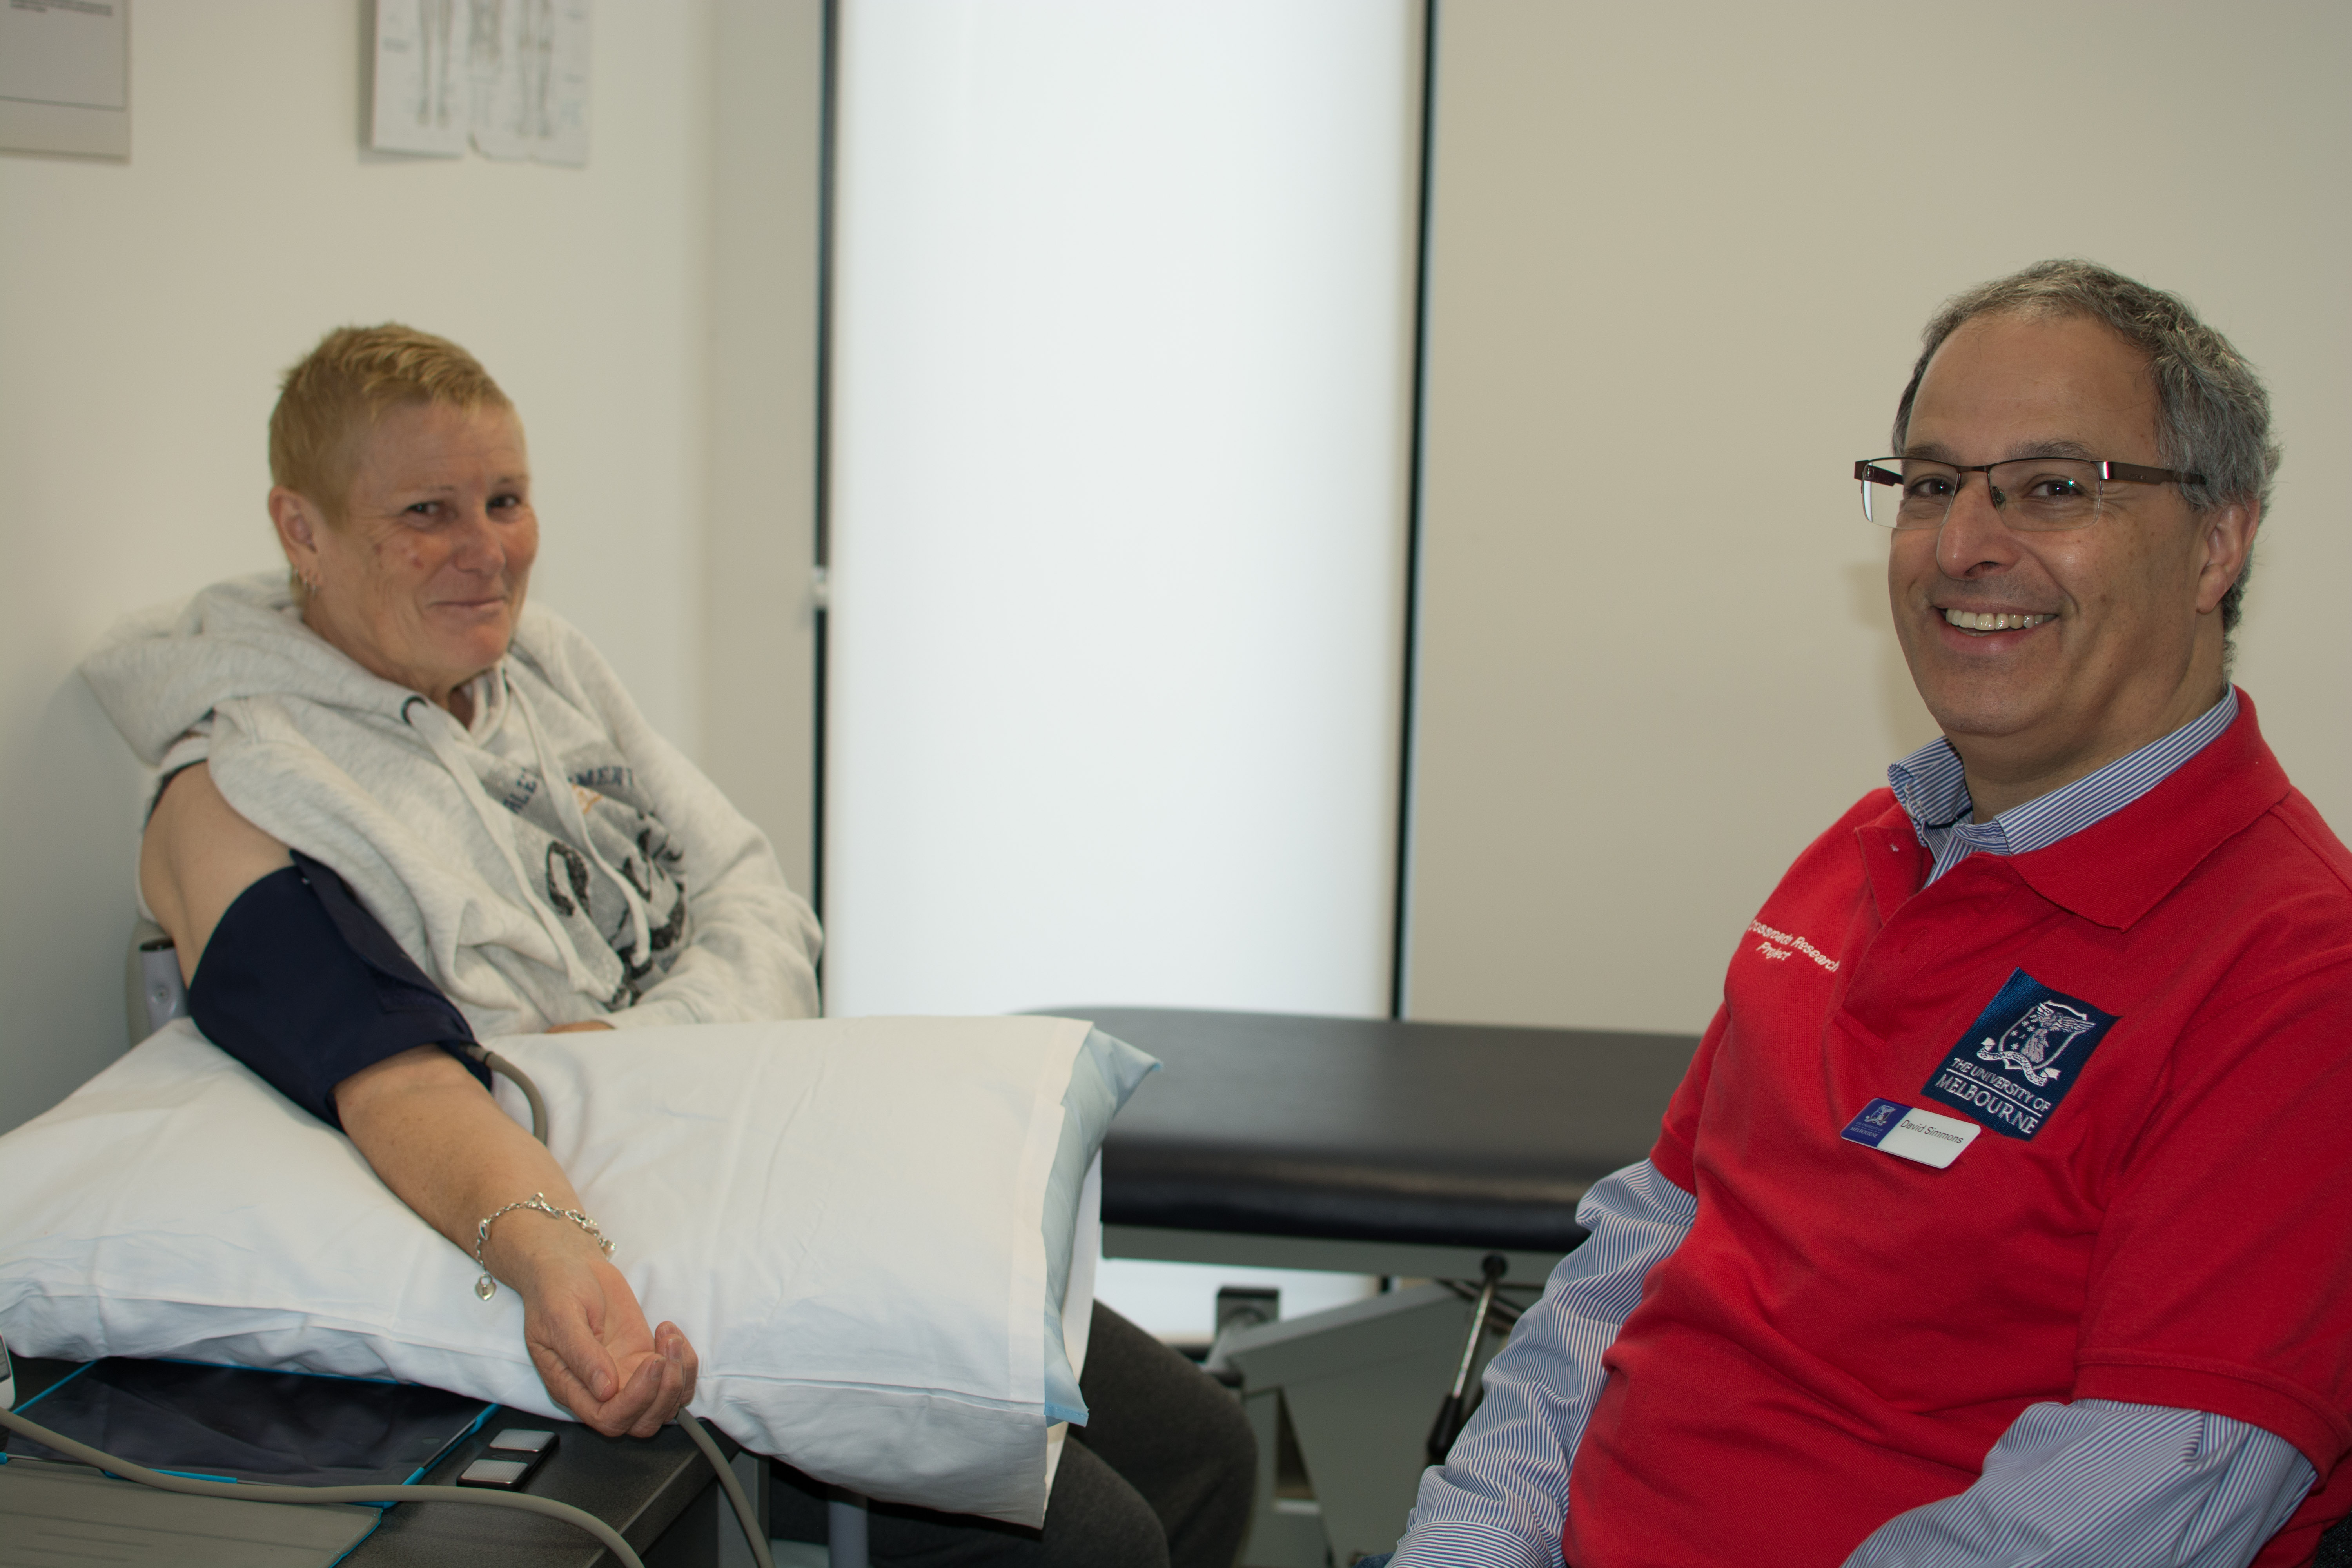 Seymour resident having her blood pressure checked by a University of Melbourne staff member in the Crossroads clinic